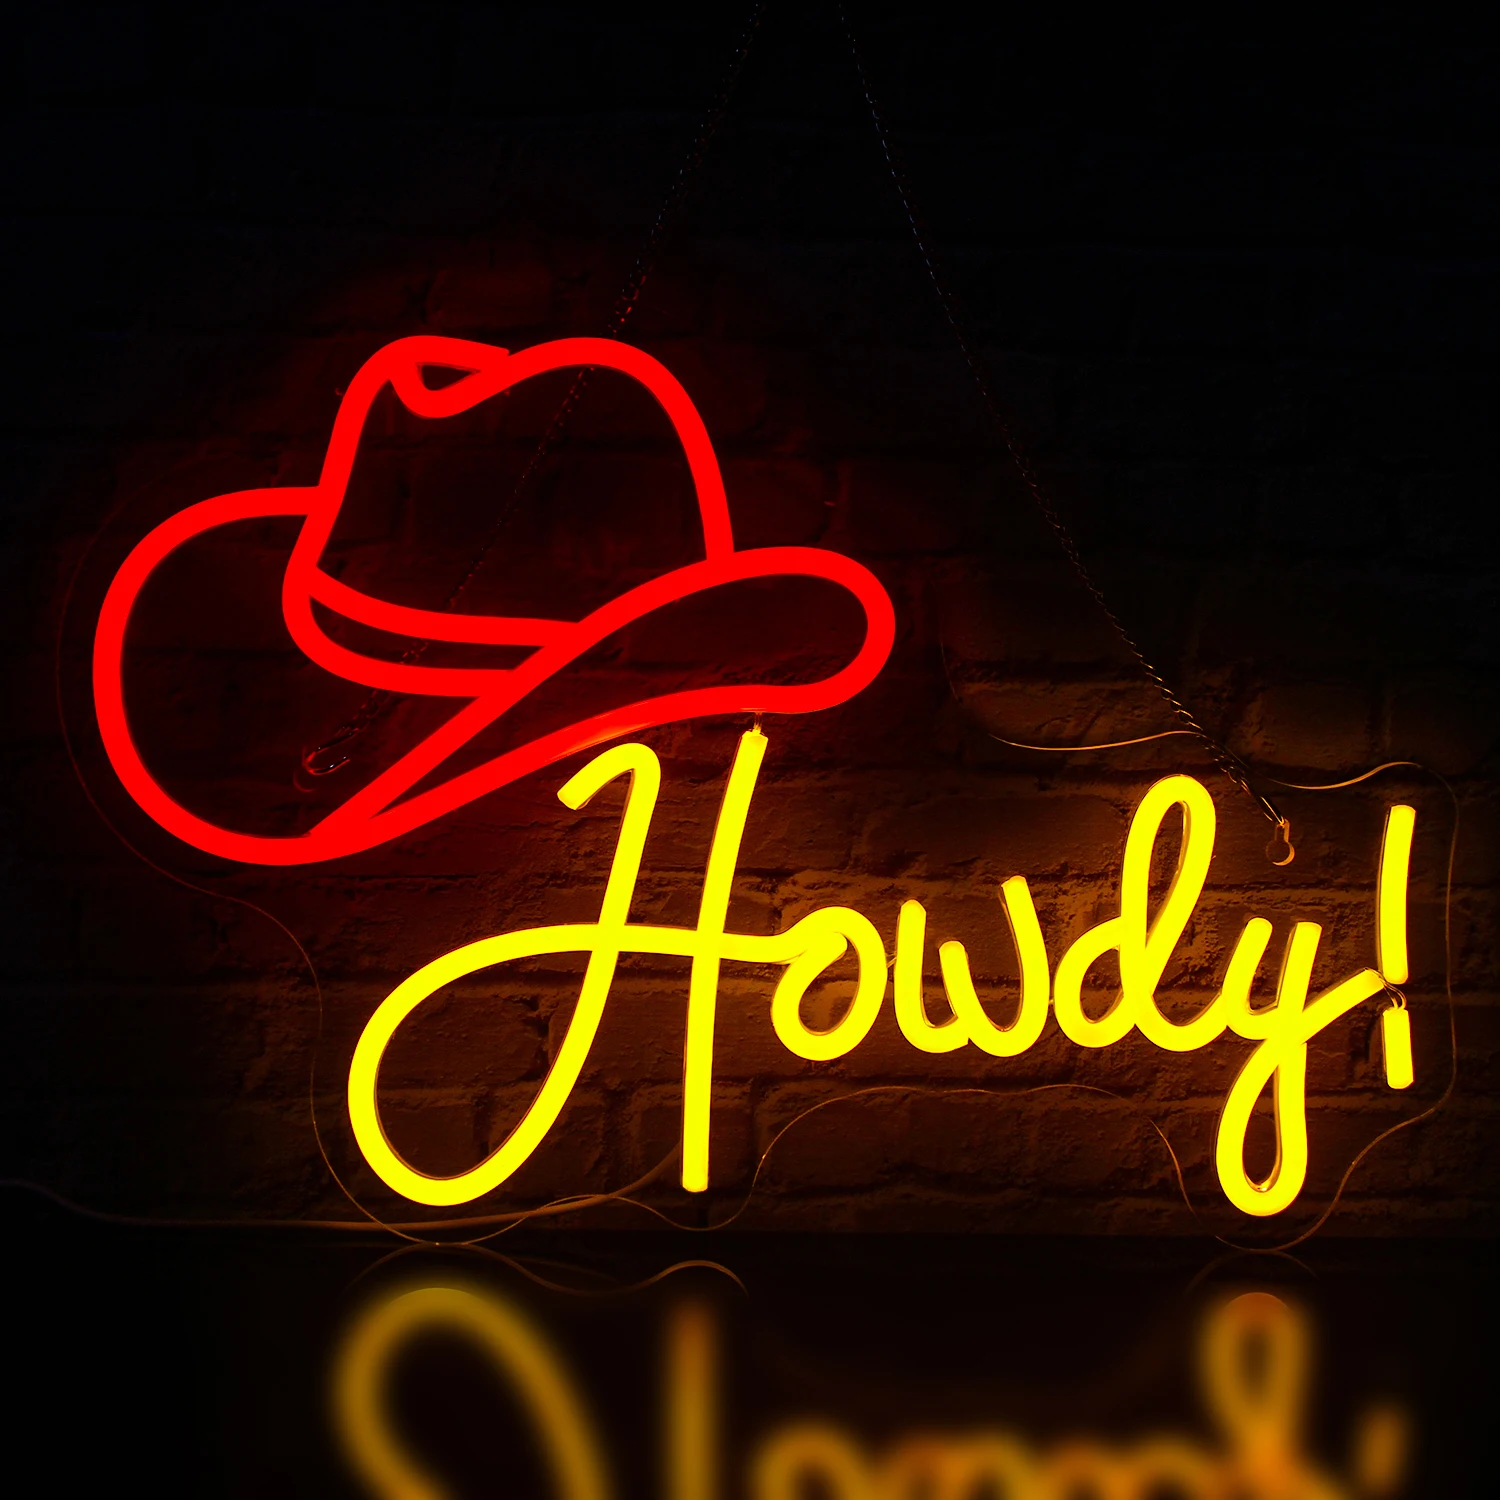 Howdy Cowboy Hat Neon Sign Colorful Letter Led Decor Neon Signs for Beer Bar Cafe Shop Bedroom Club Wall Decor Neon Light USB